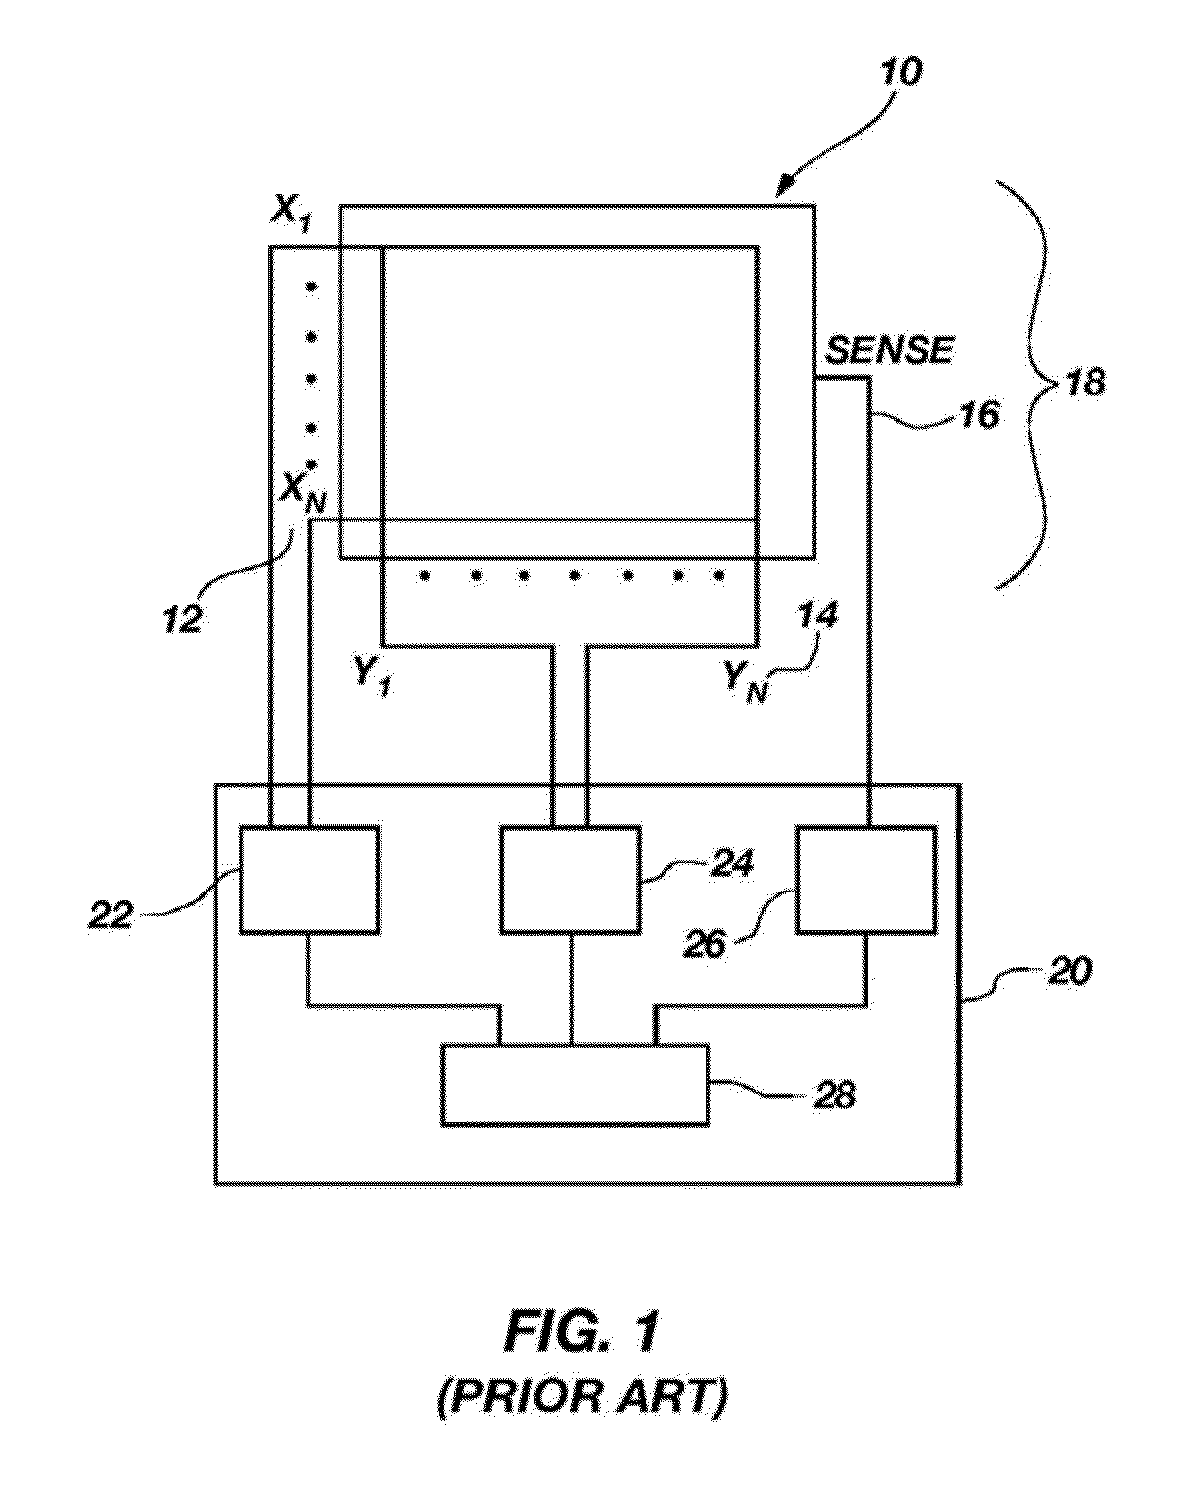 System for using synchronized timed orthogonal measurement patterns to enable high update report rates on a large capacitive touch screen